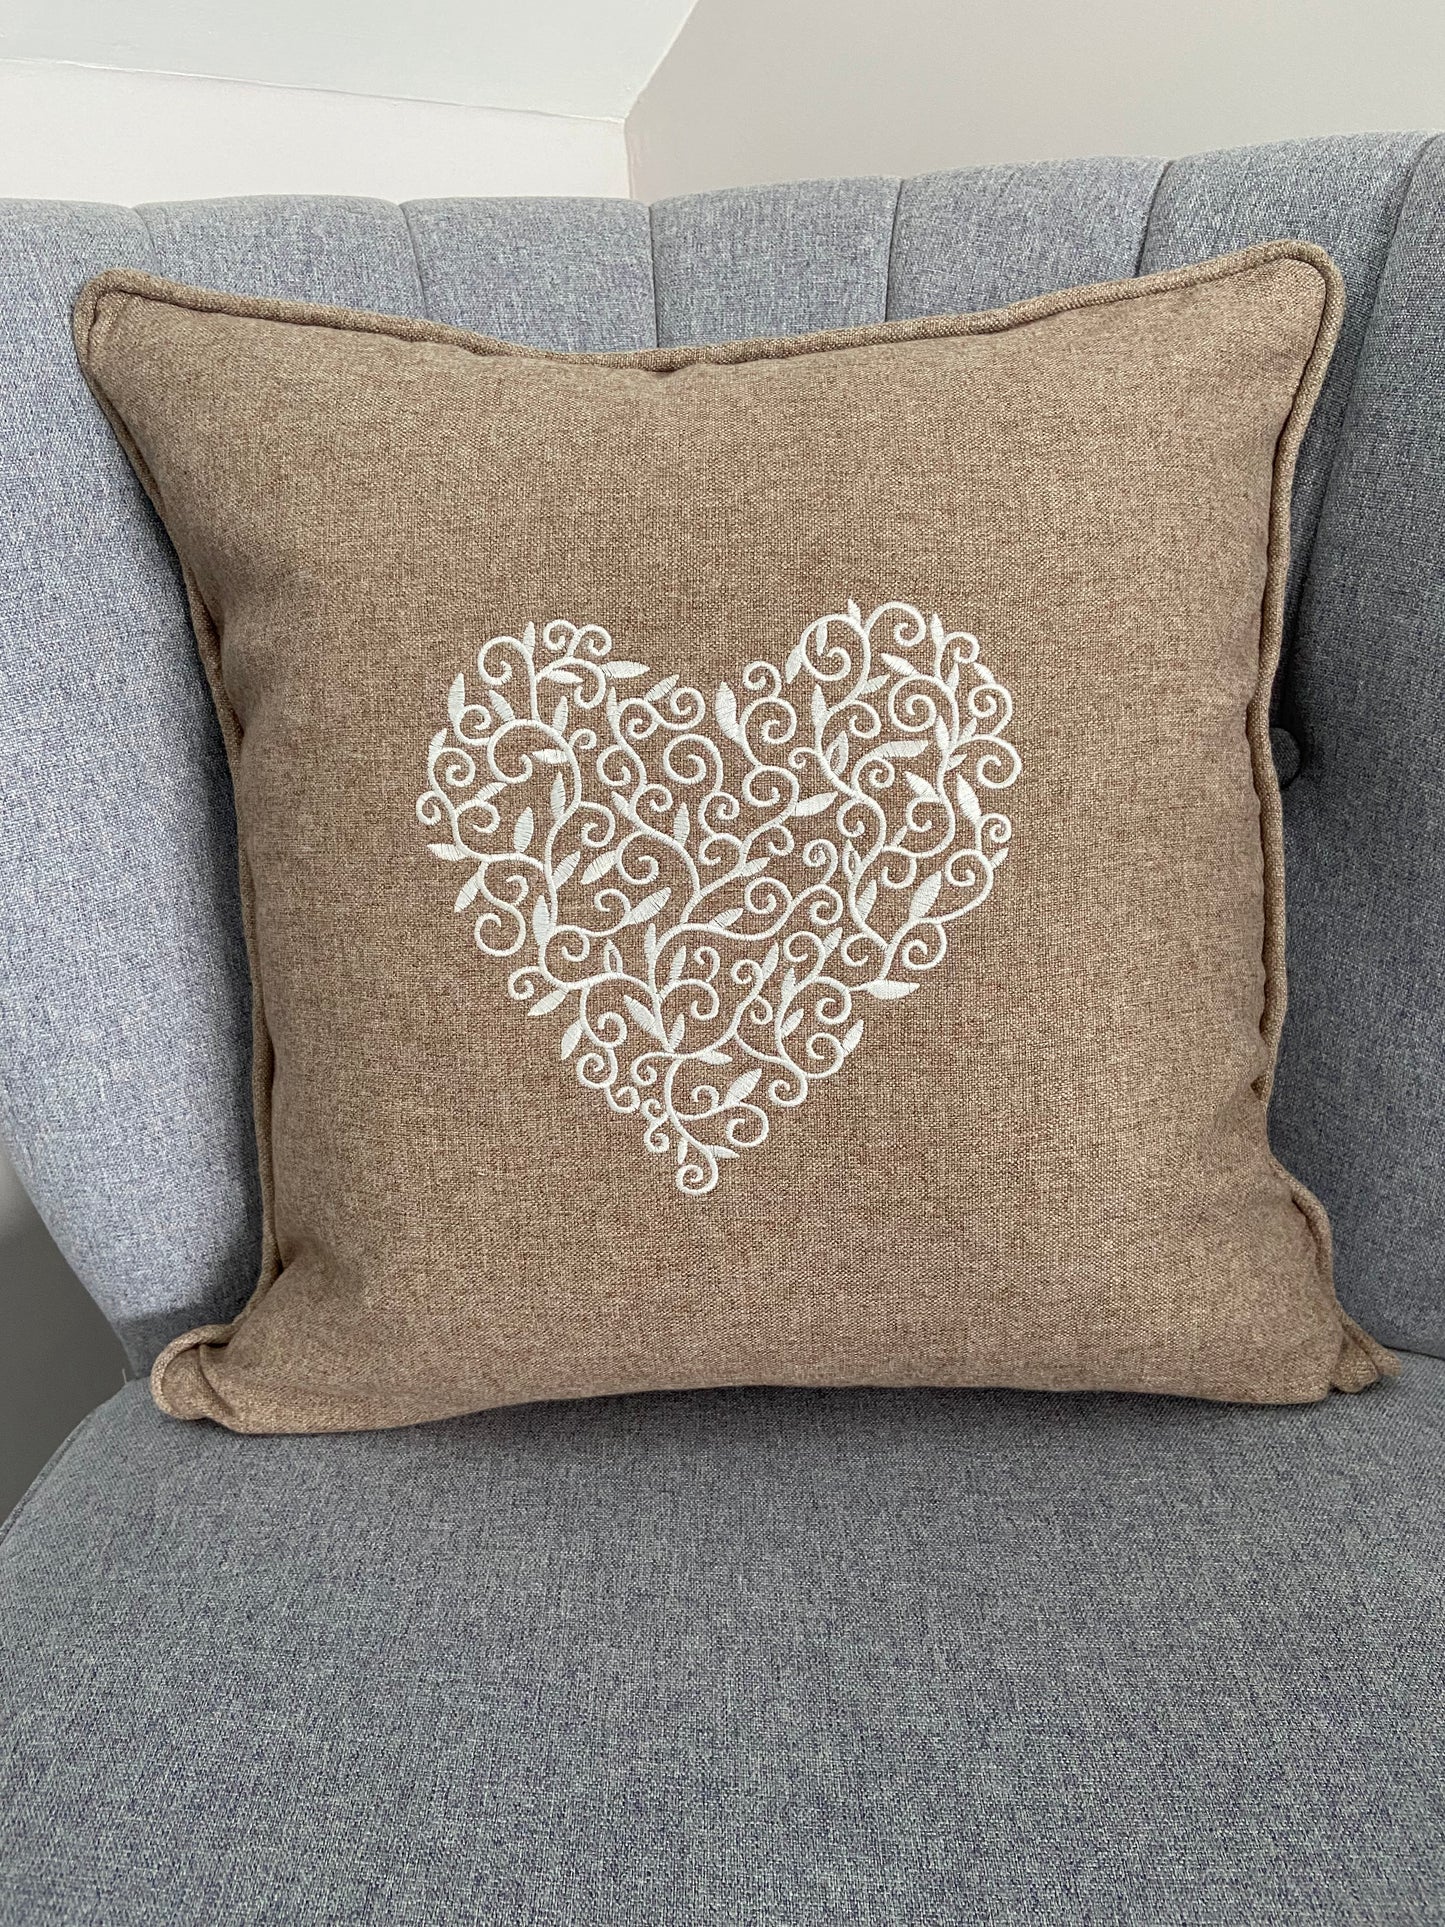 Detailed Heart Embroidered Cushion Cover - 45cm x 45cm